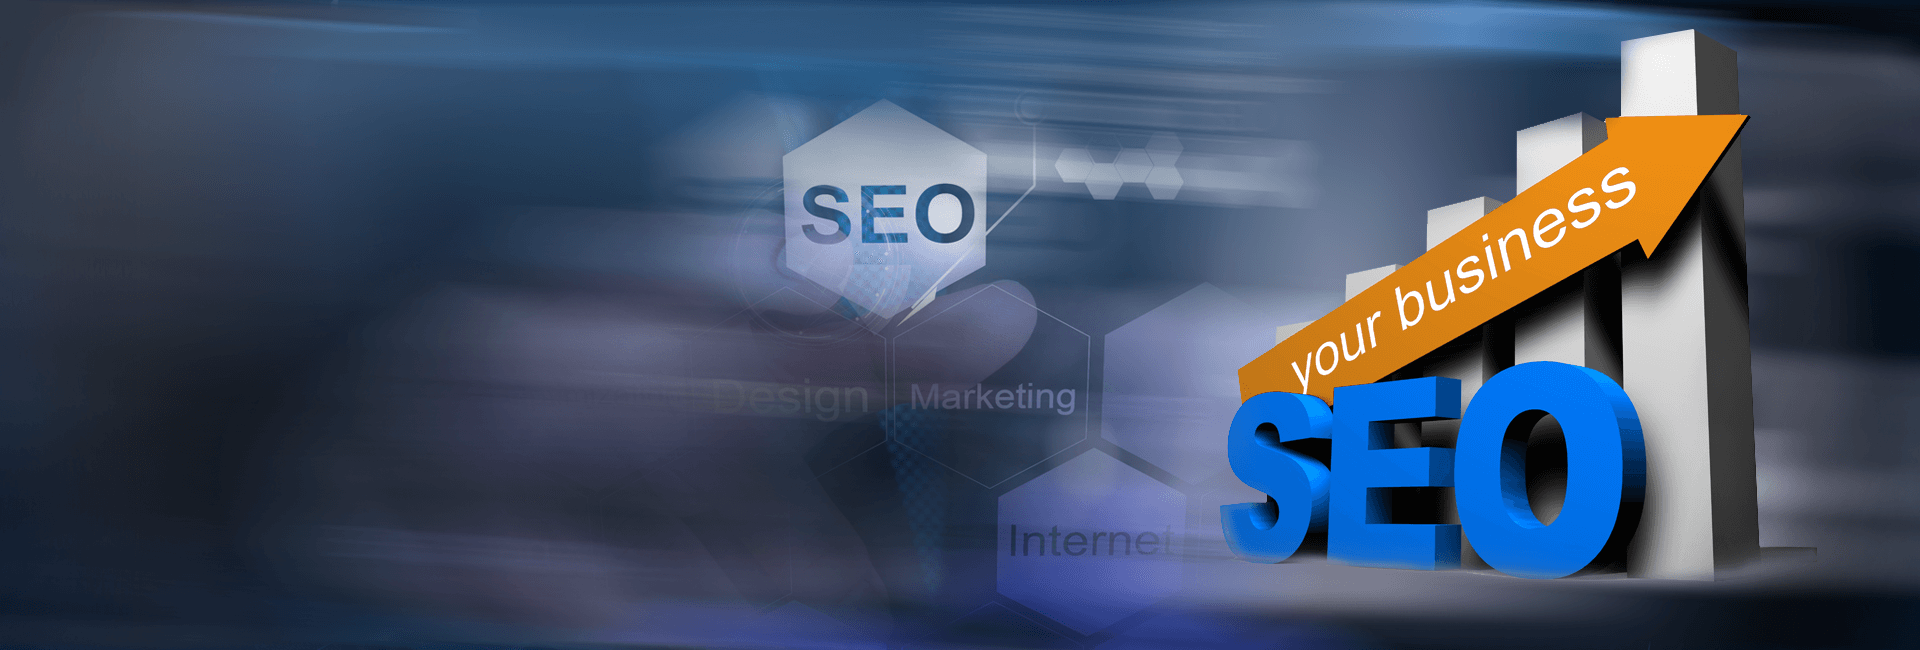 Your Business SEO